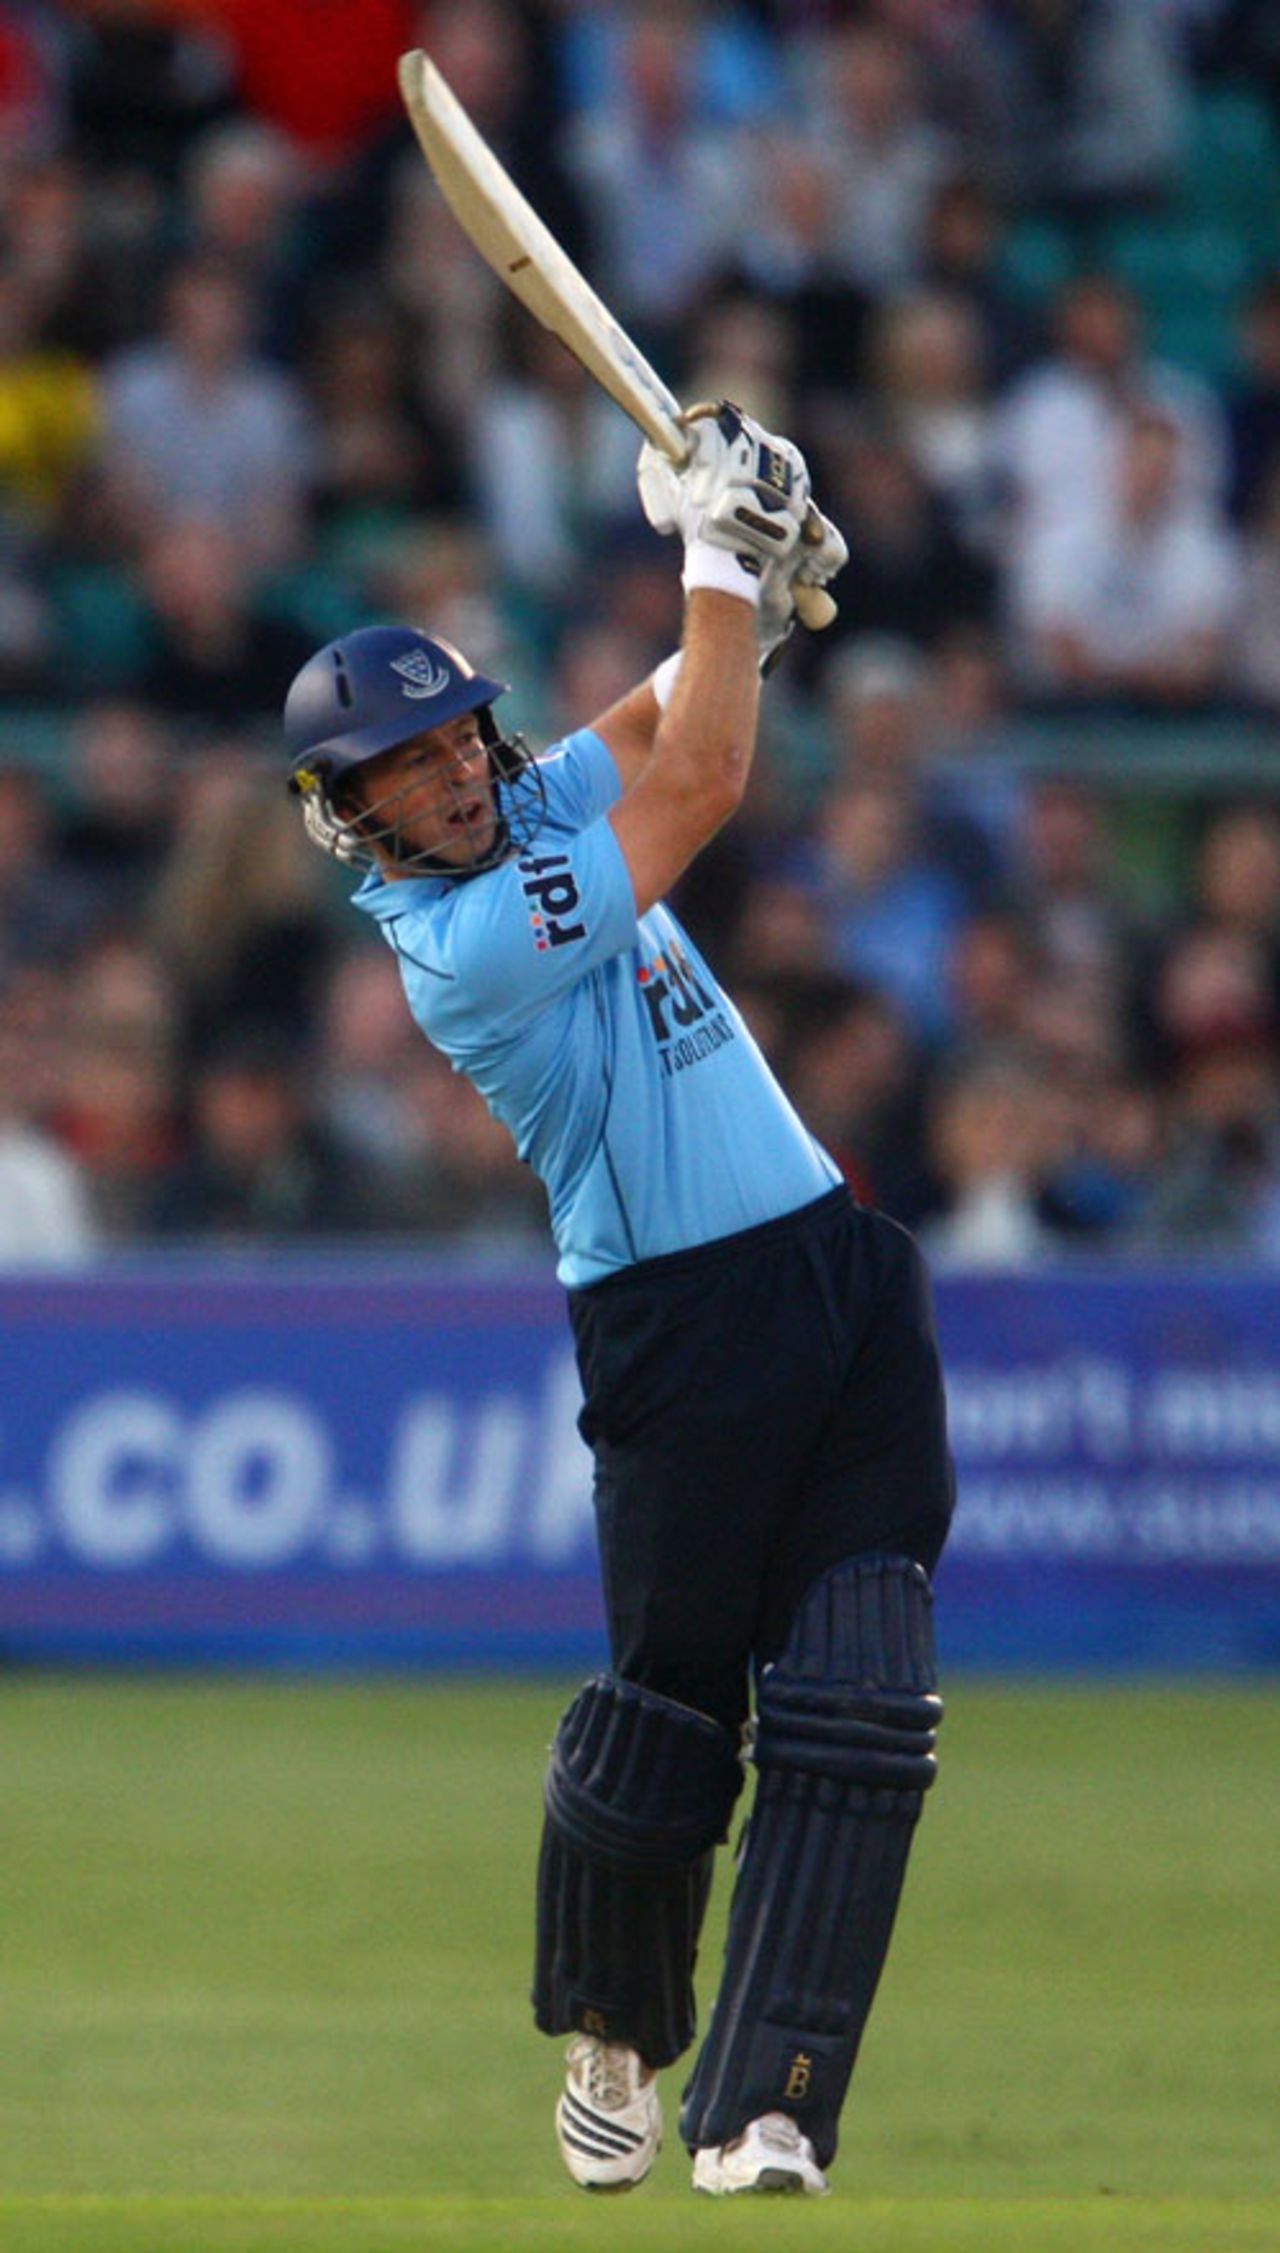 Chris Nash hammers a four as he guides Sussex to victory, Sussex v Hampshire, Twenty20 Cup, Hove, May 29, 2009